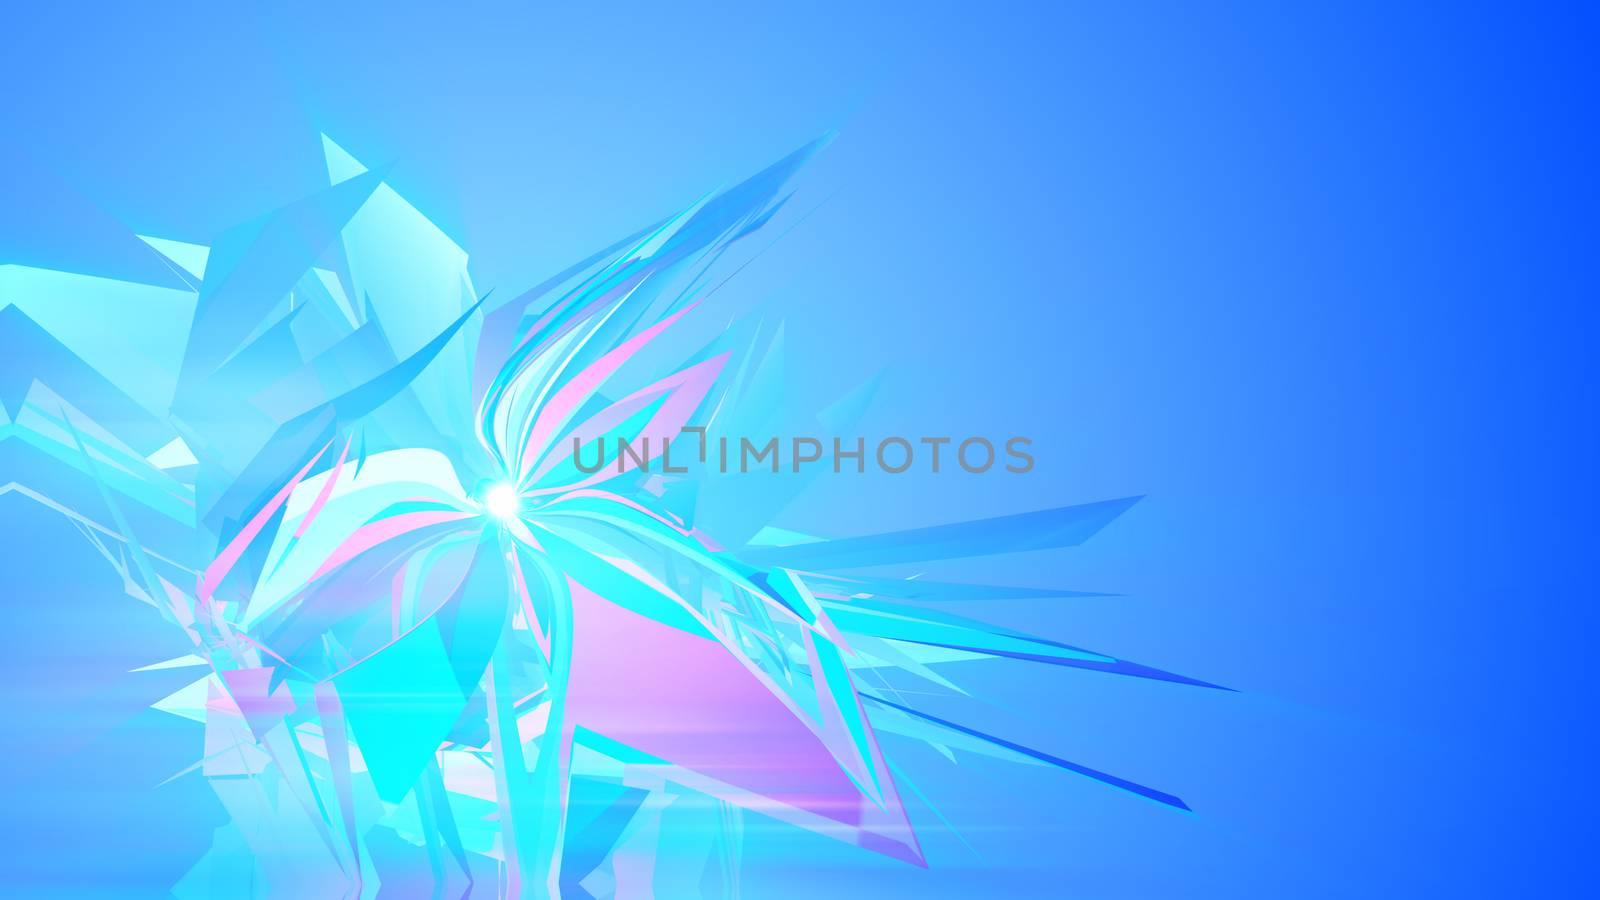 An abstract art 3d illustration of shimmering see-through triangles spinning around like diamond crystals in the celeste background. They create the mood of luxury and impression.